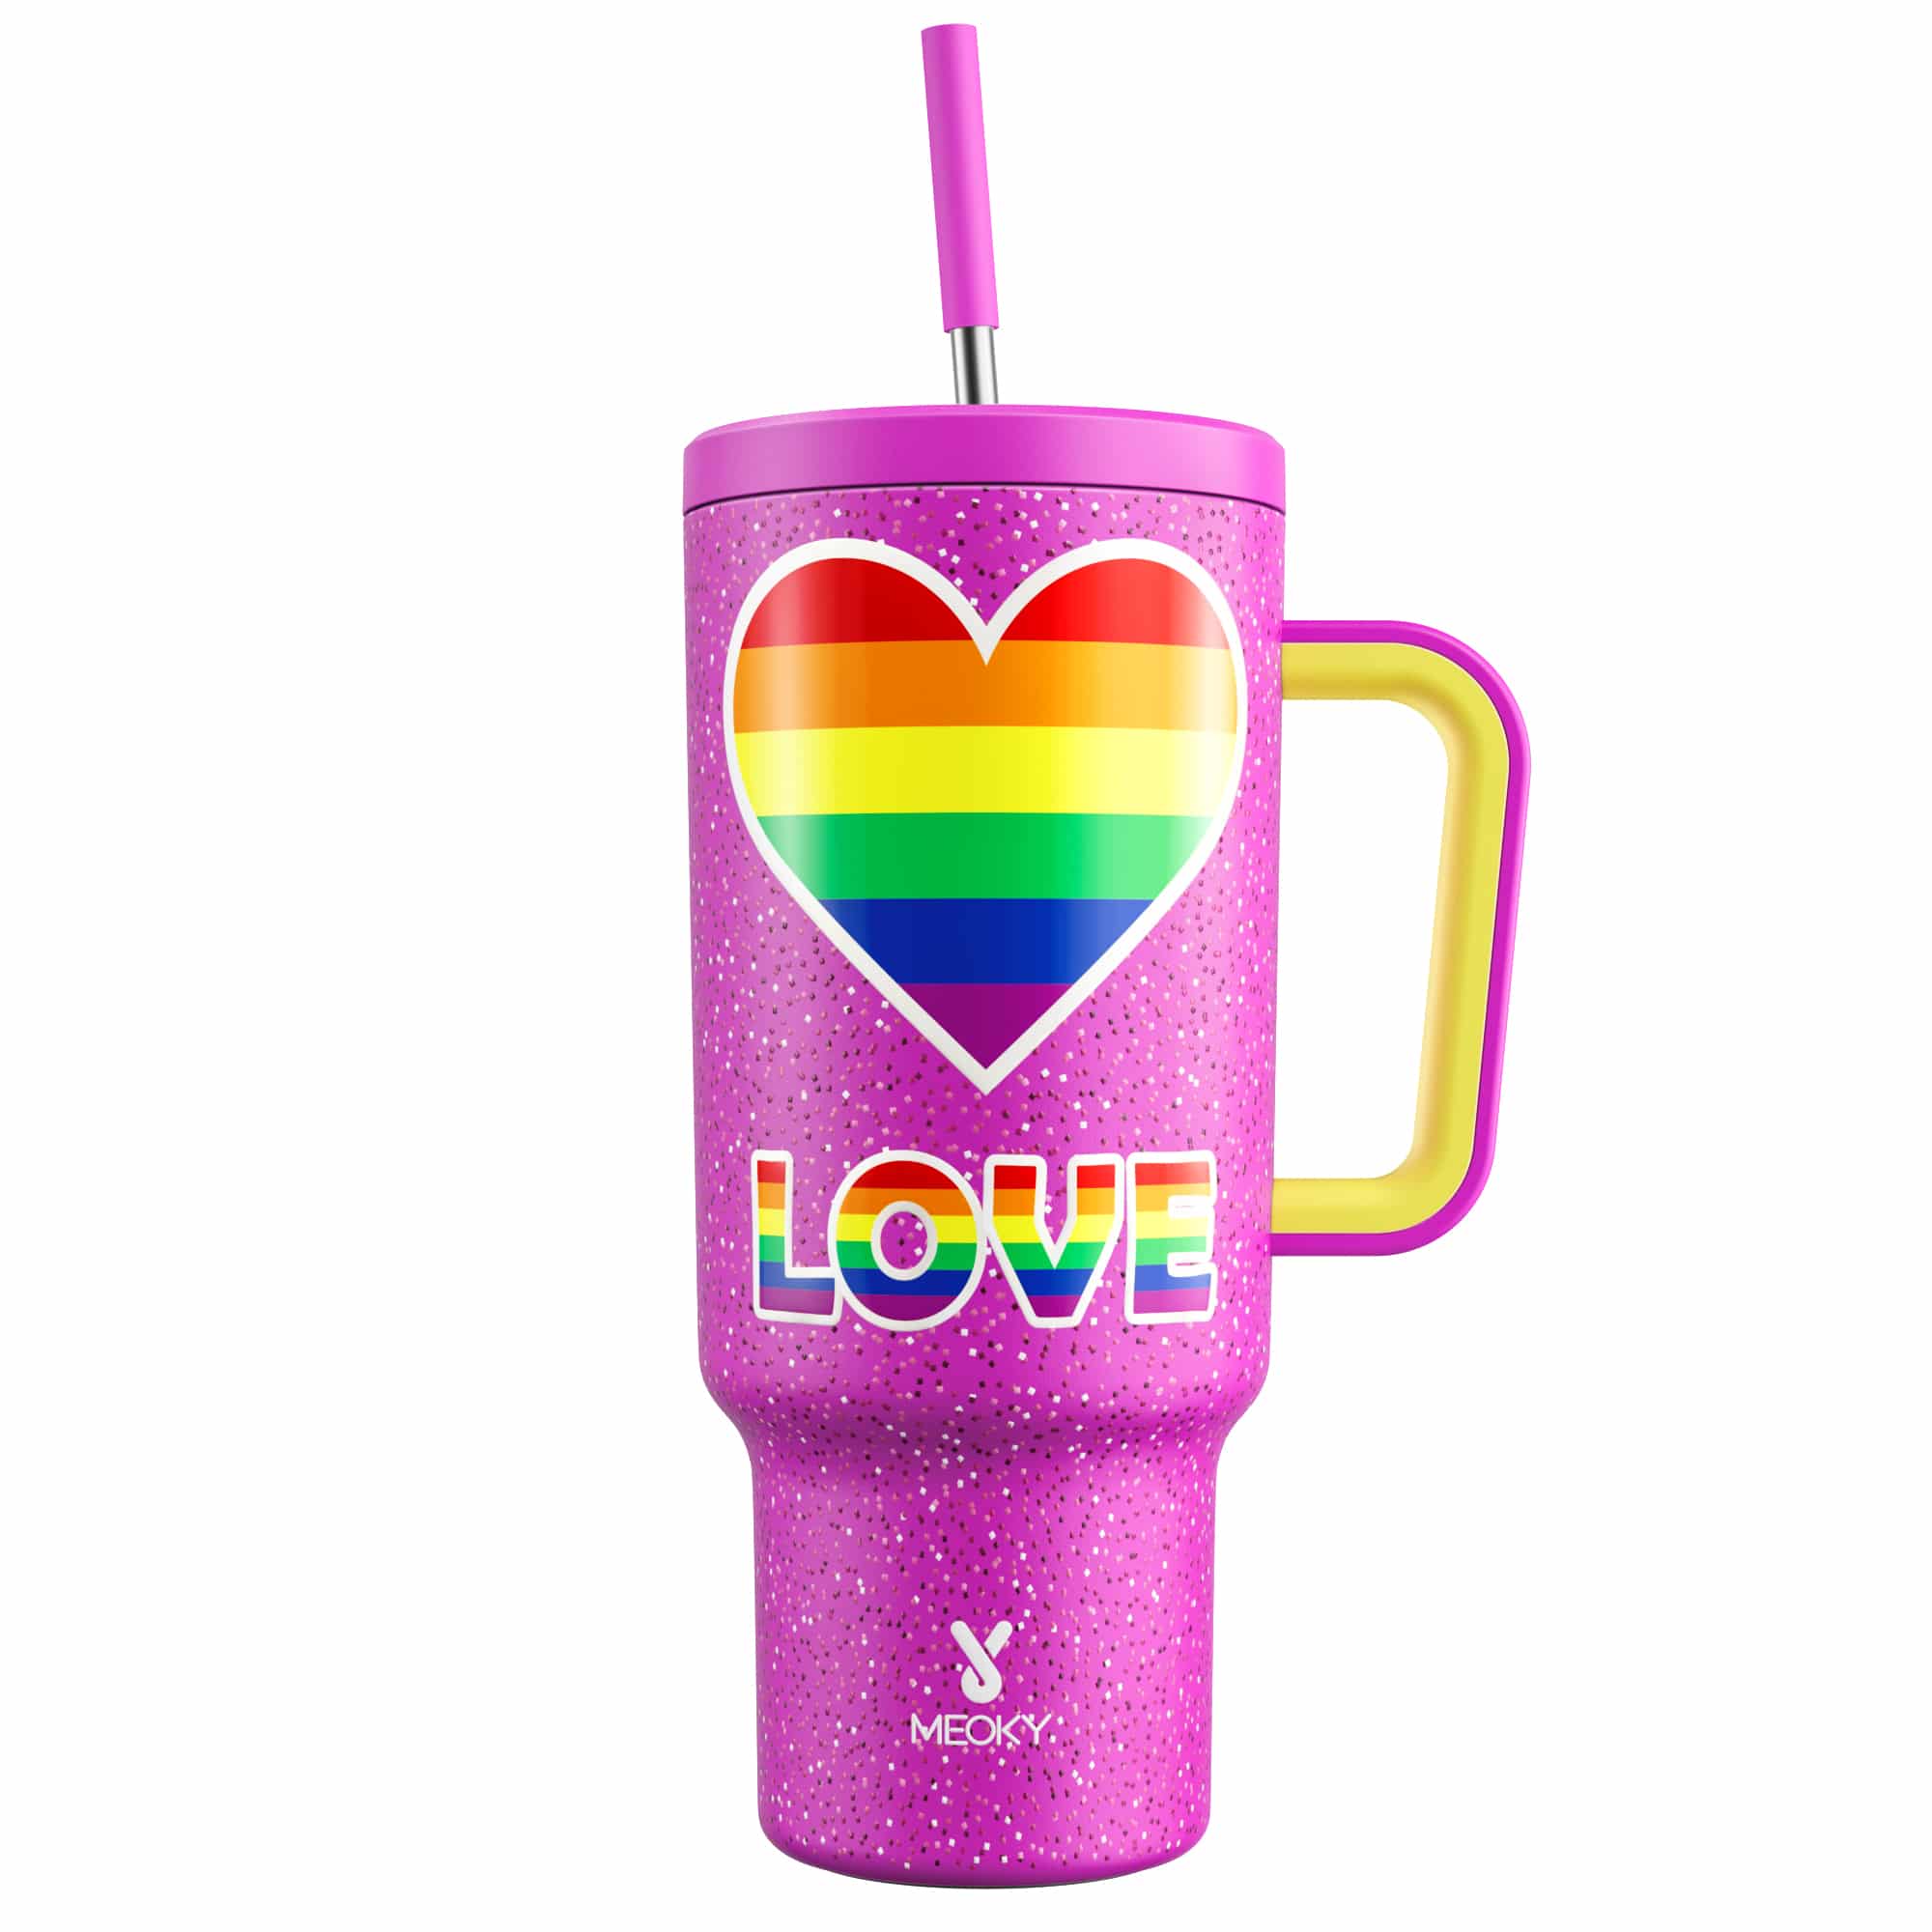 Meoky 40oz Tumbler with Handle and Straw Lid -SpectrumLove